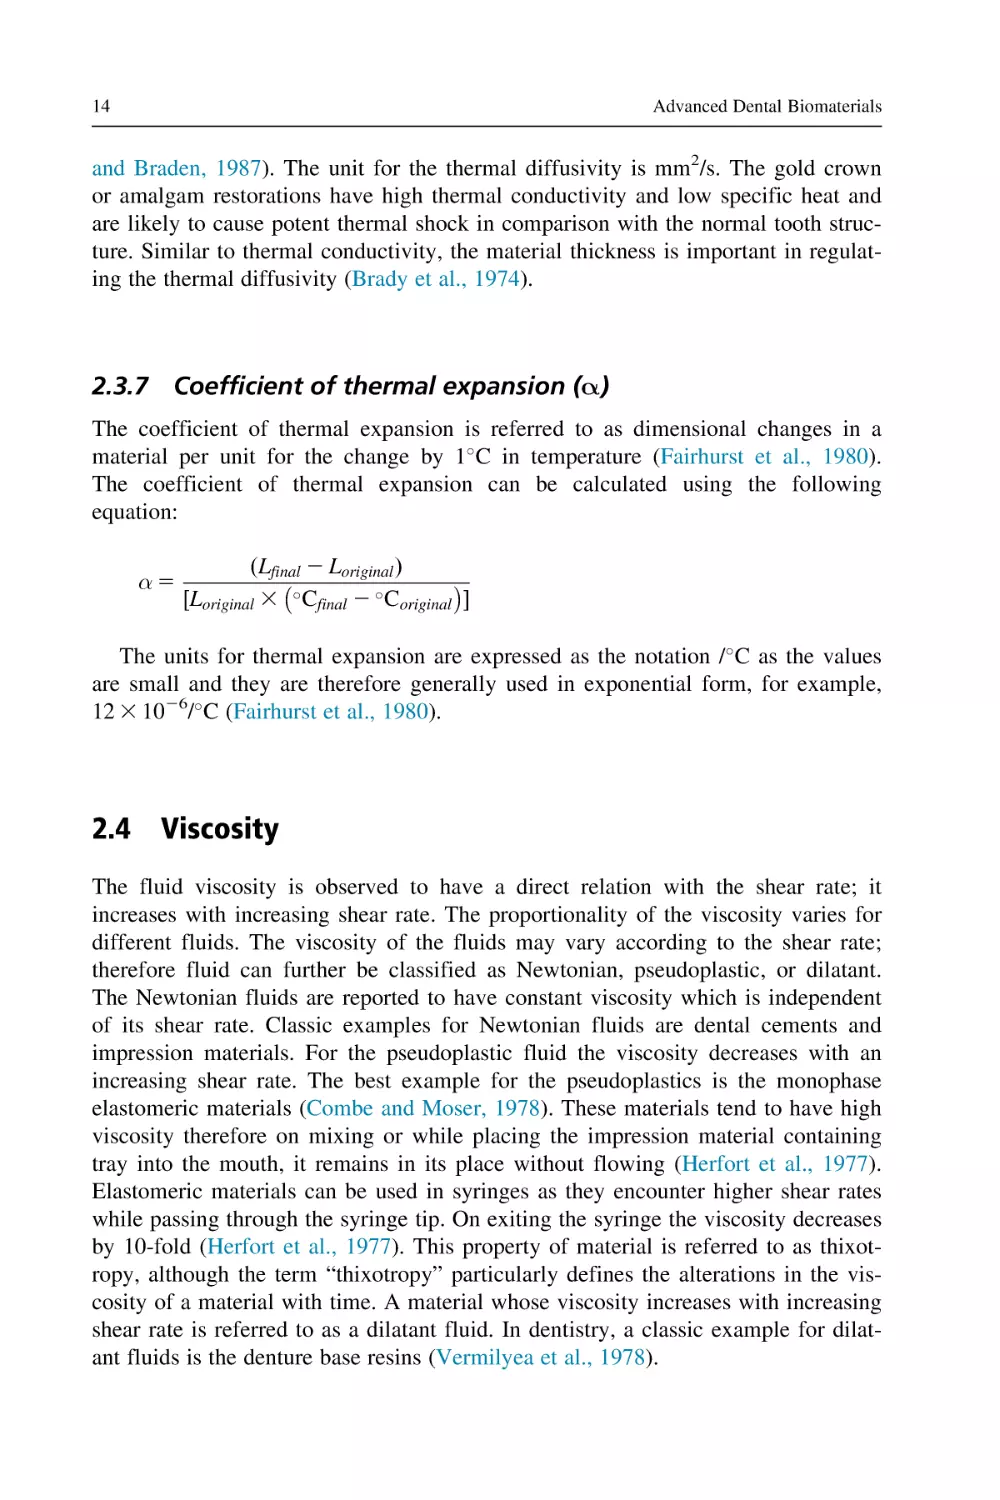 2.3.7 Coefficient of thermal expansion (α)
2.4 Viscosity